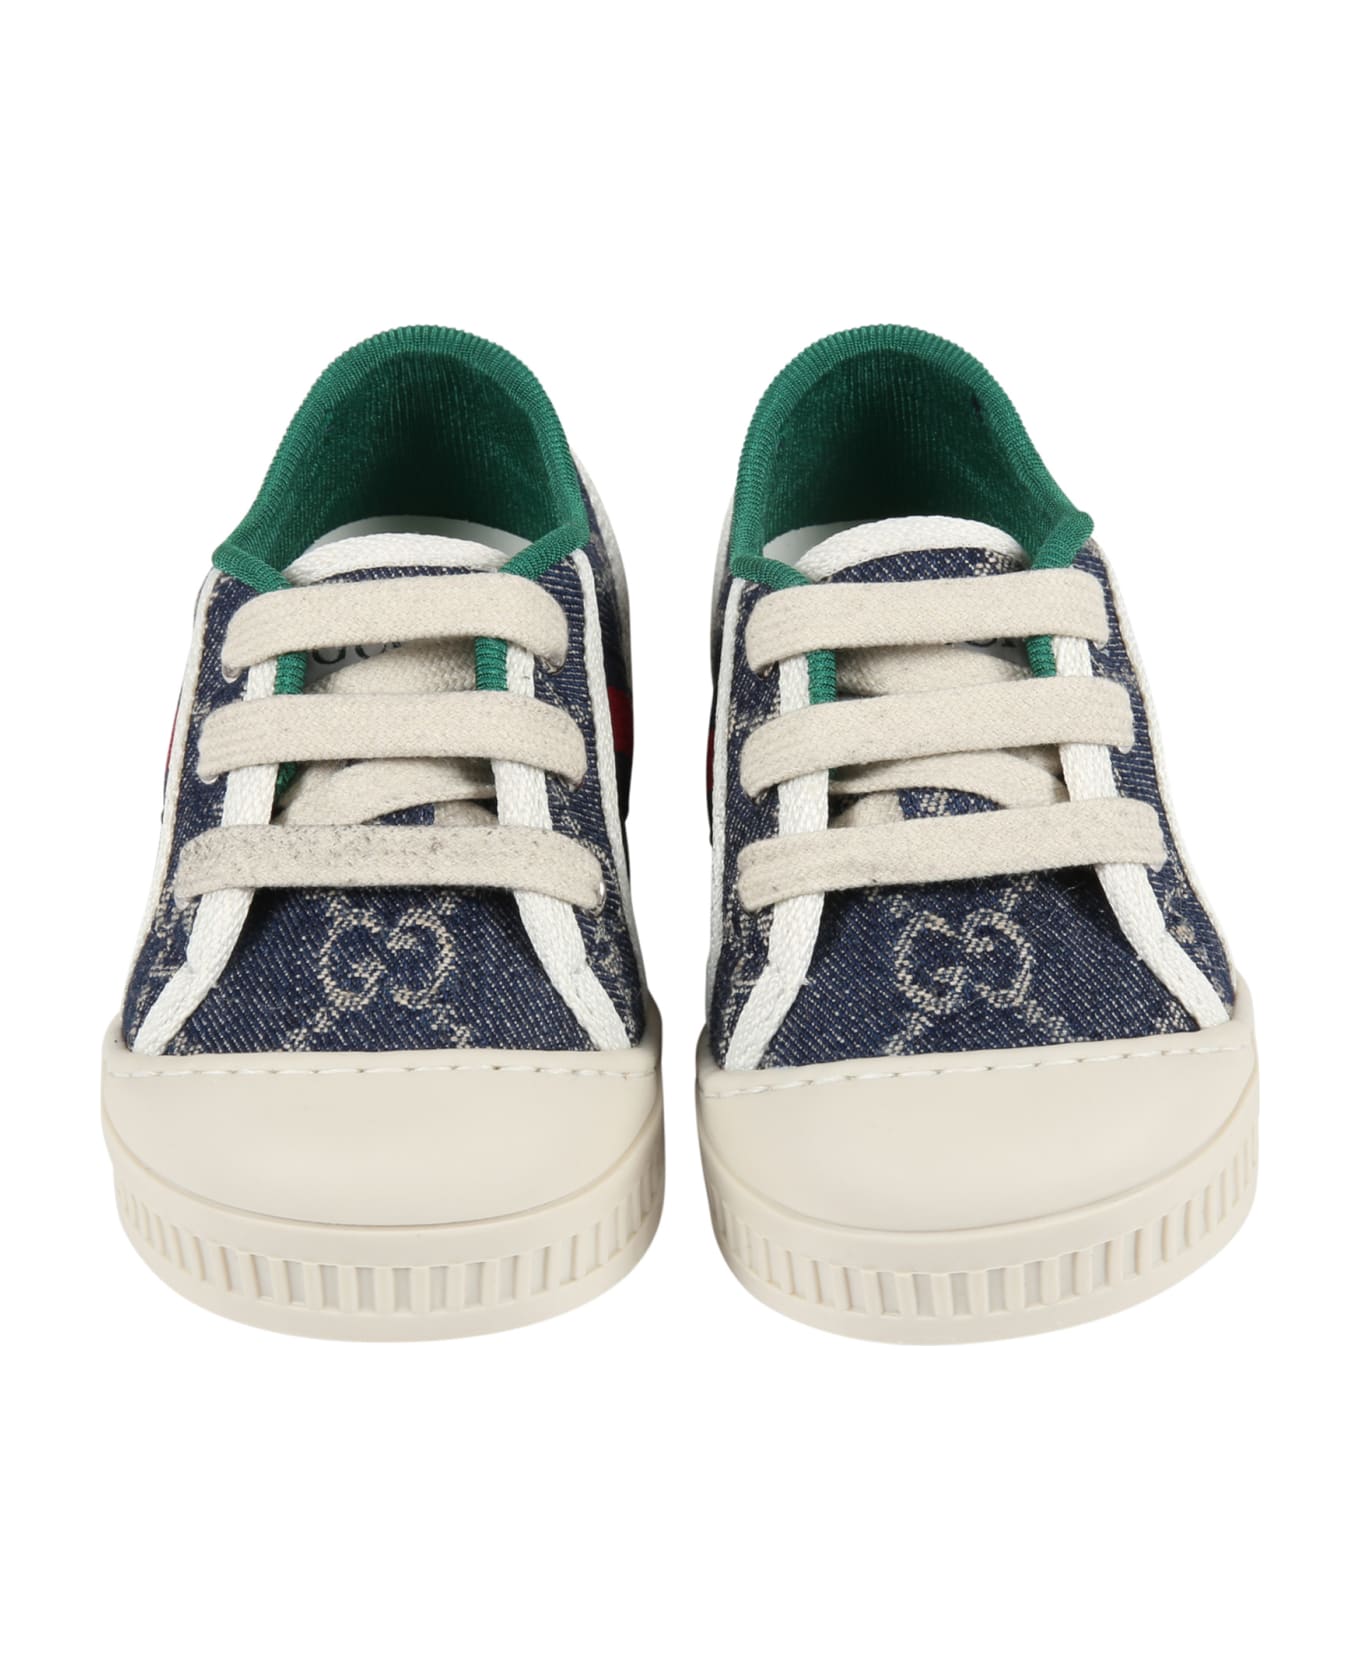 Gucci Blue Sneakers For Kids With Double Gg